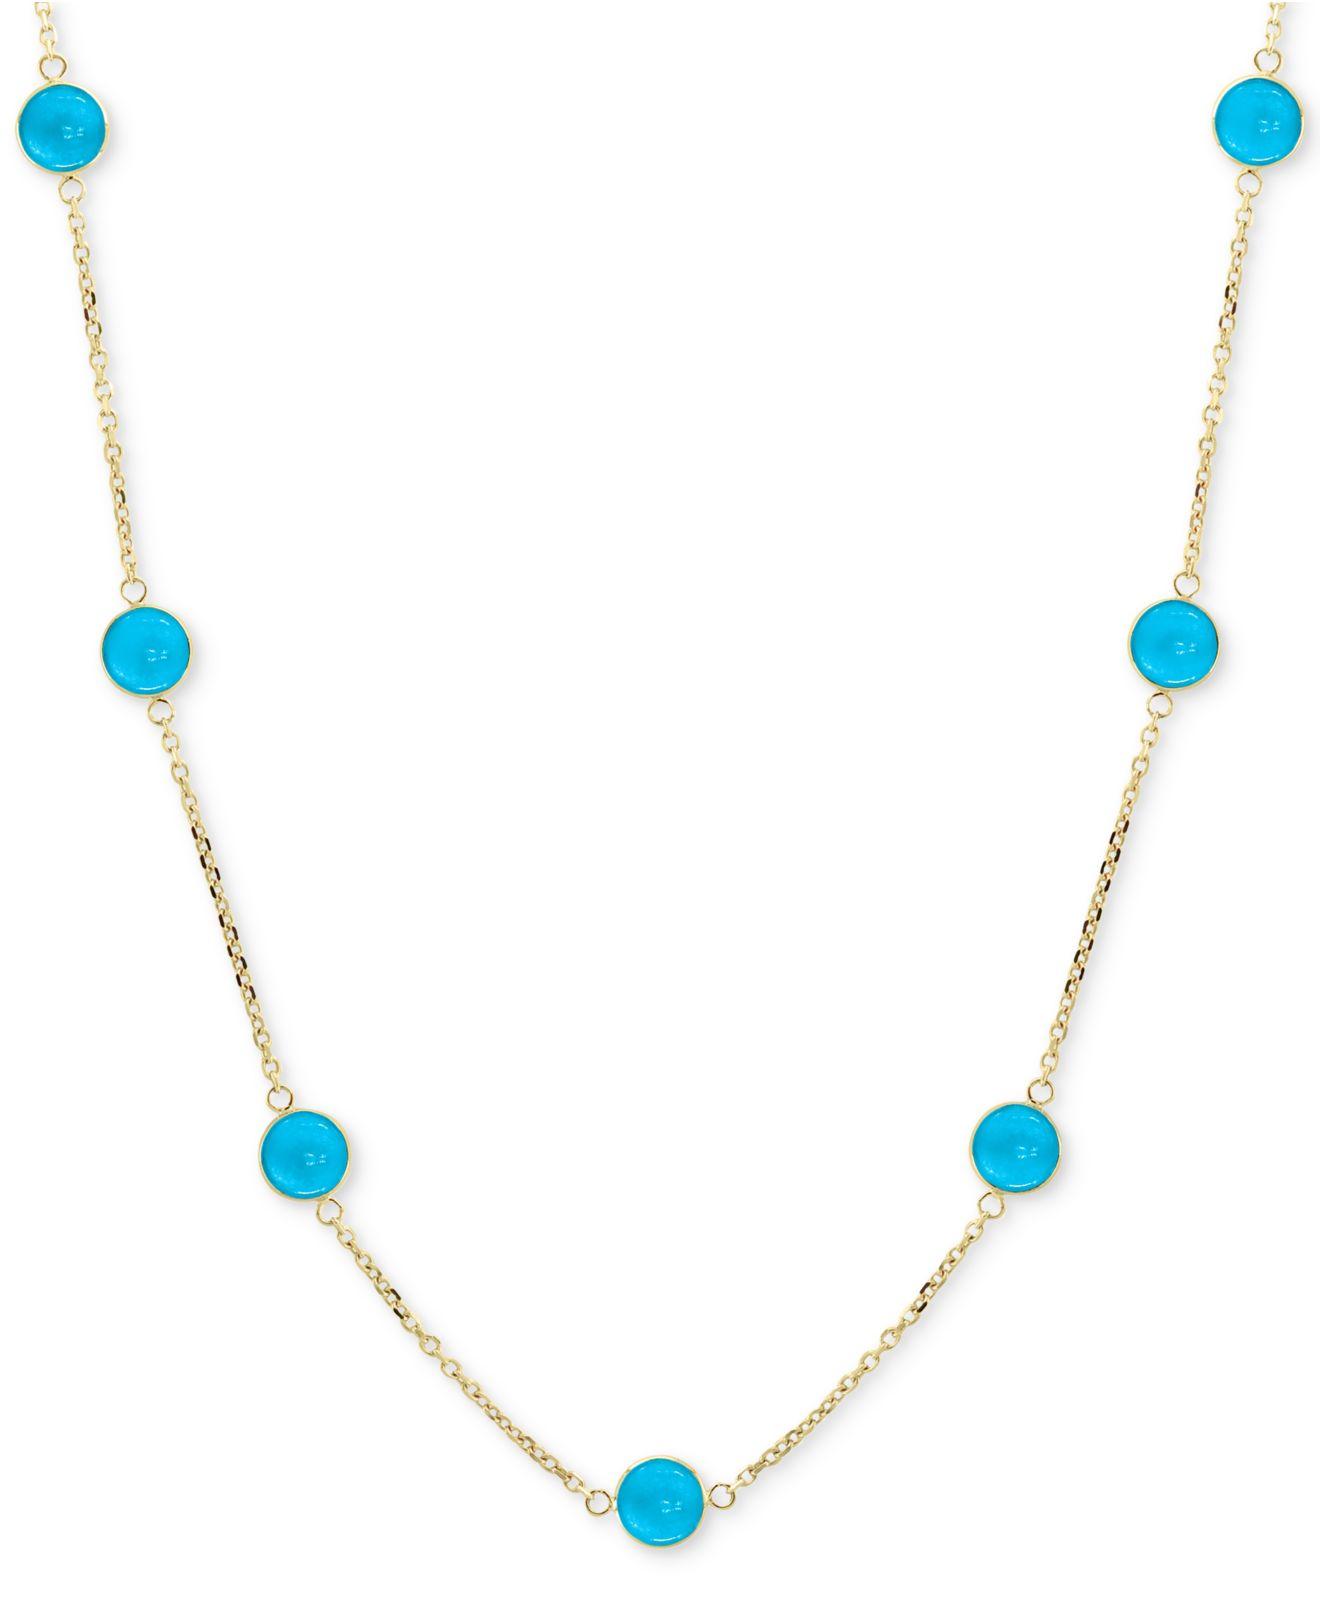 Turquoise Collar Necklace In 14k Gold 